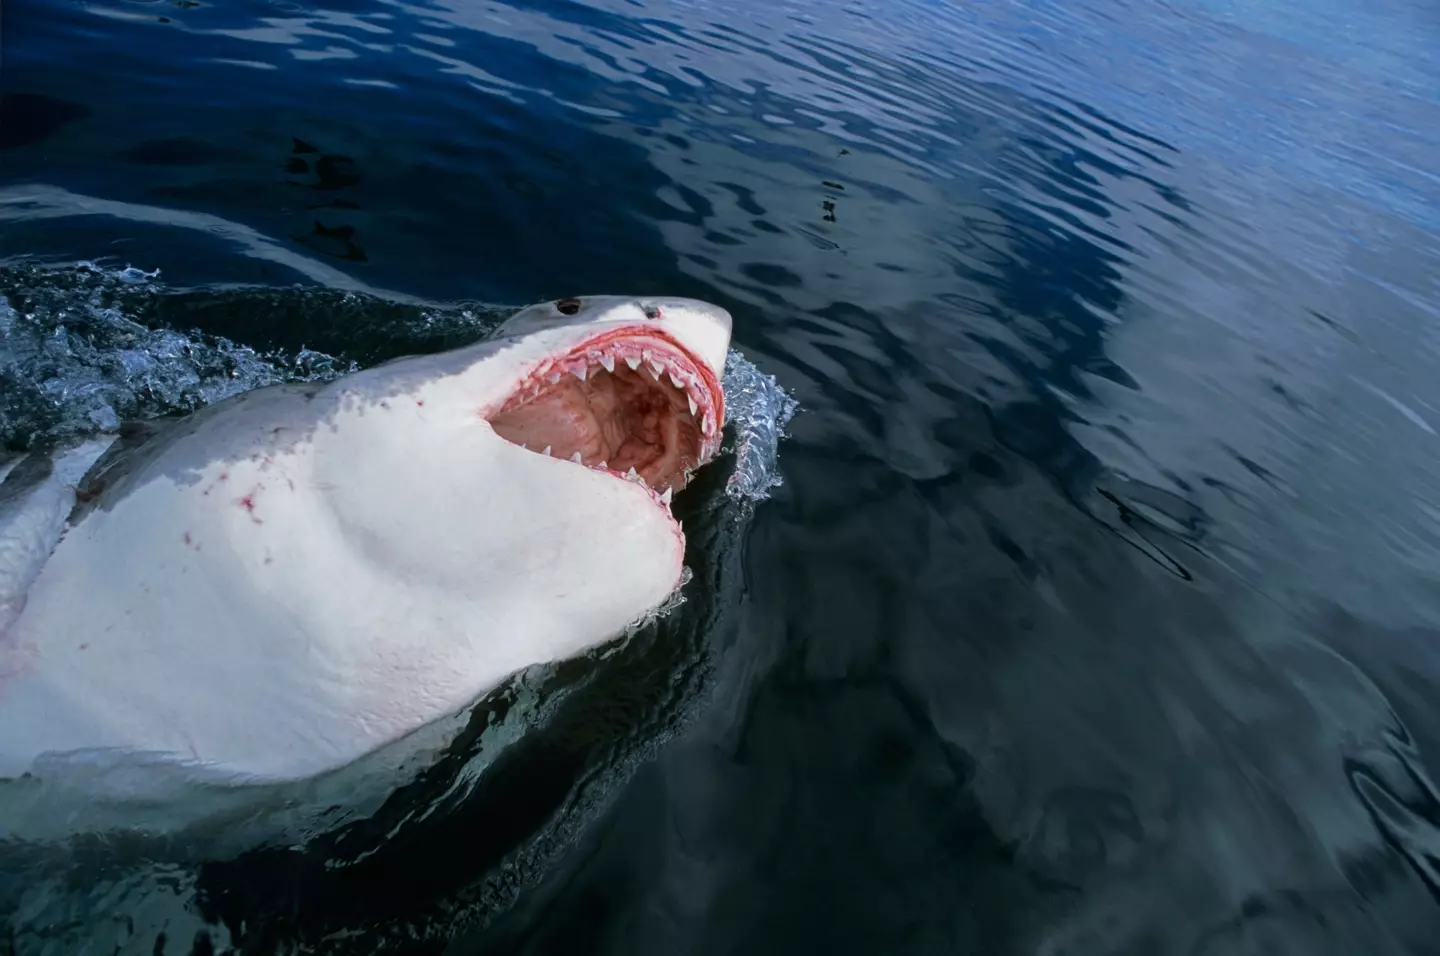 Even great white sharks only attack humans rarely.